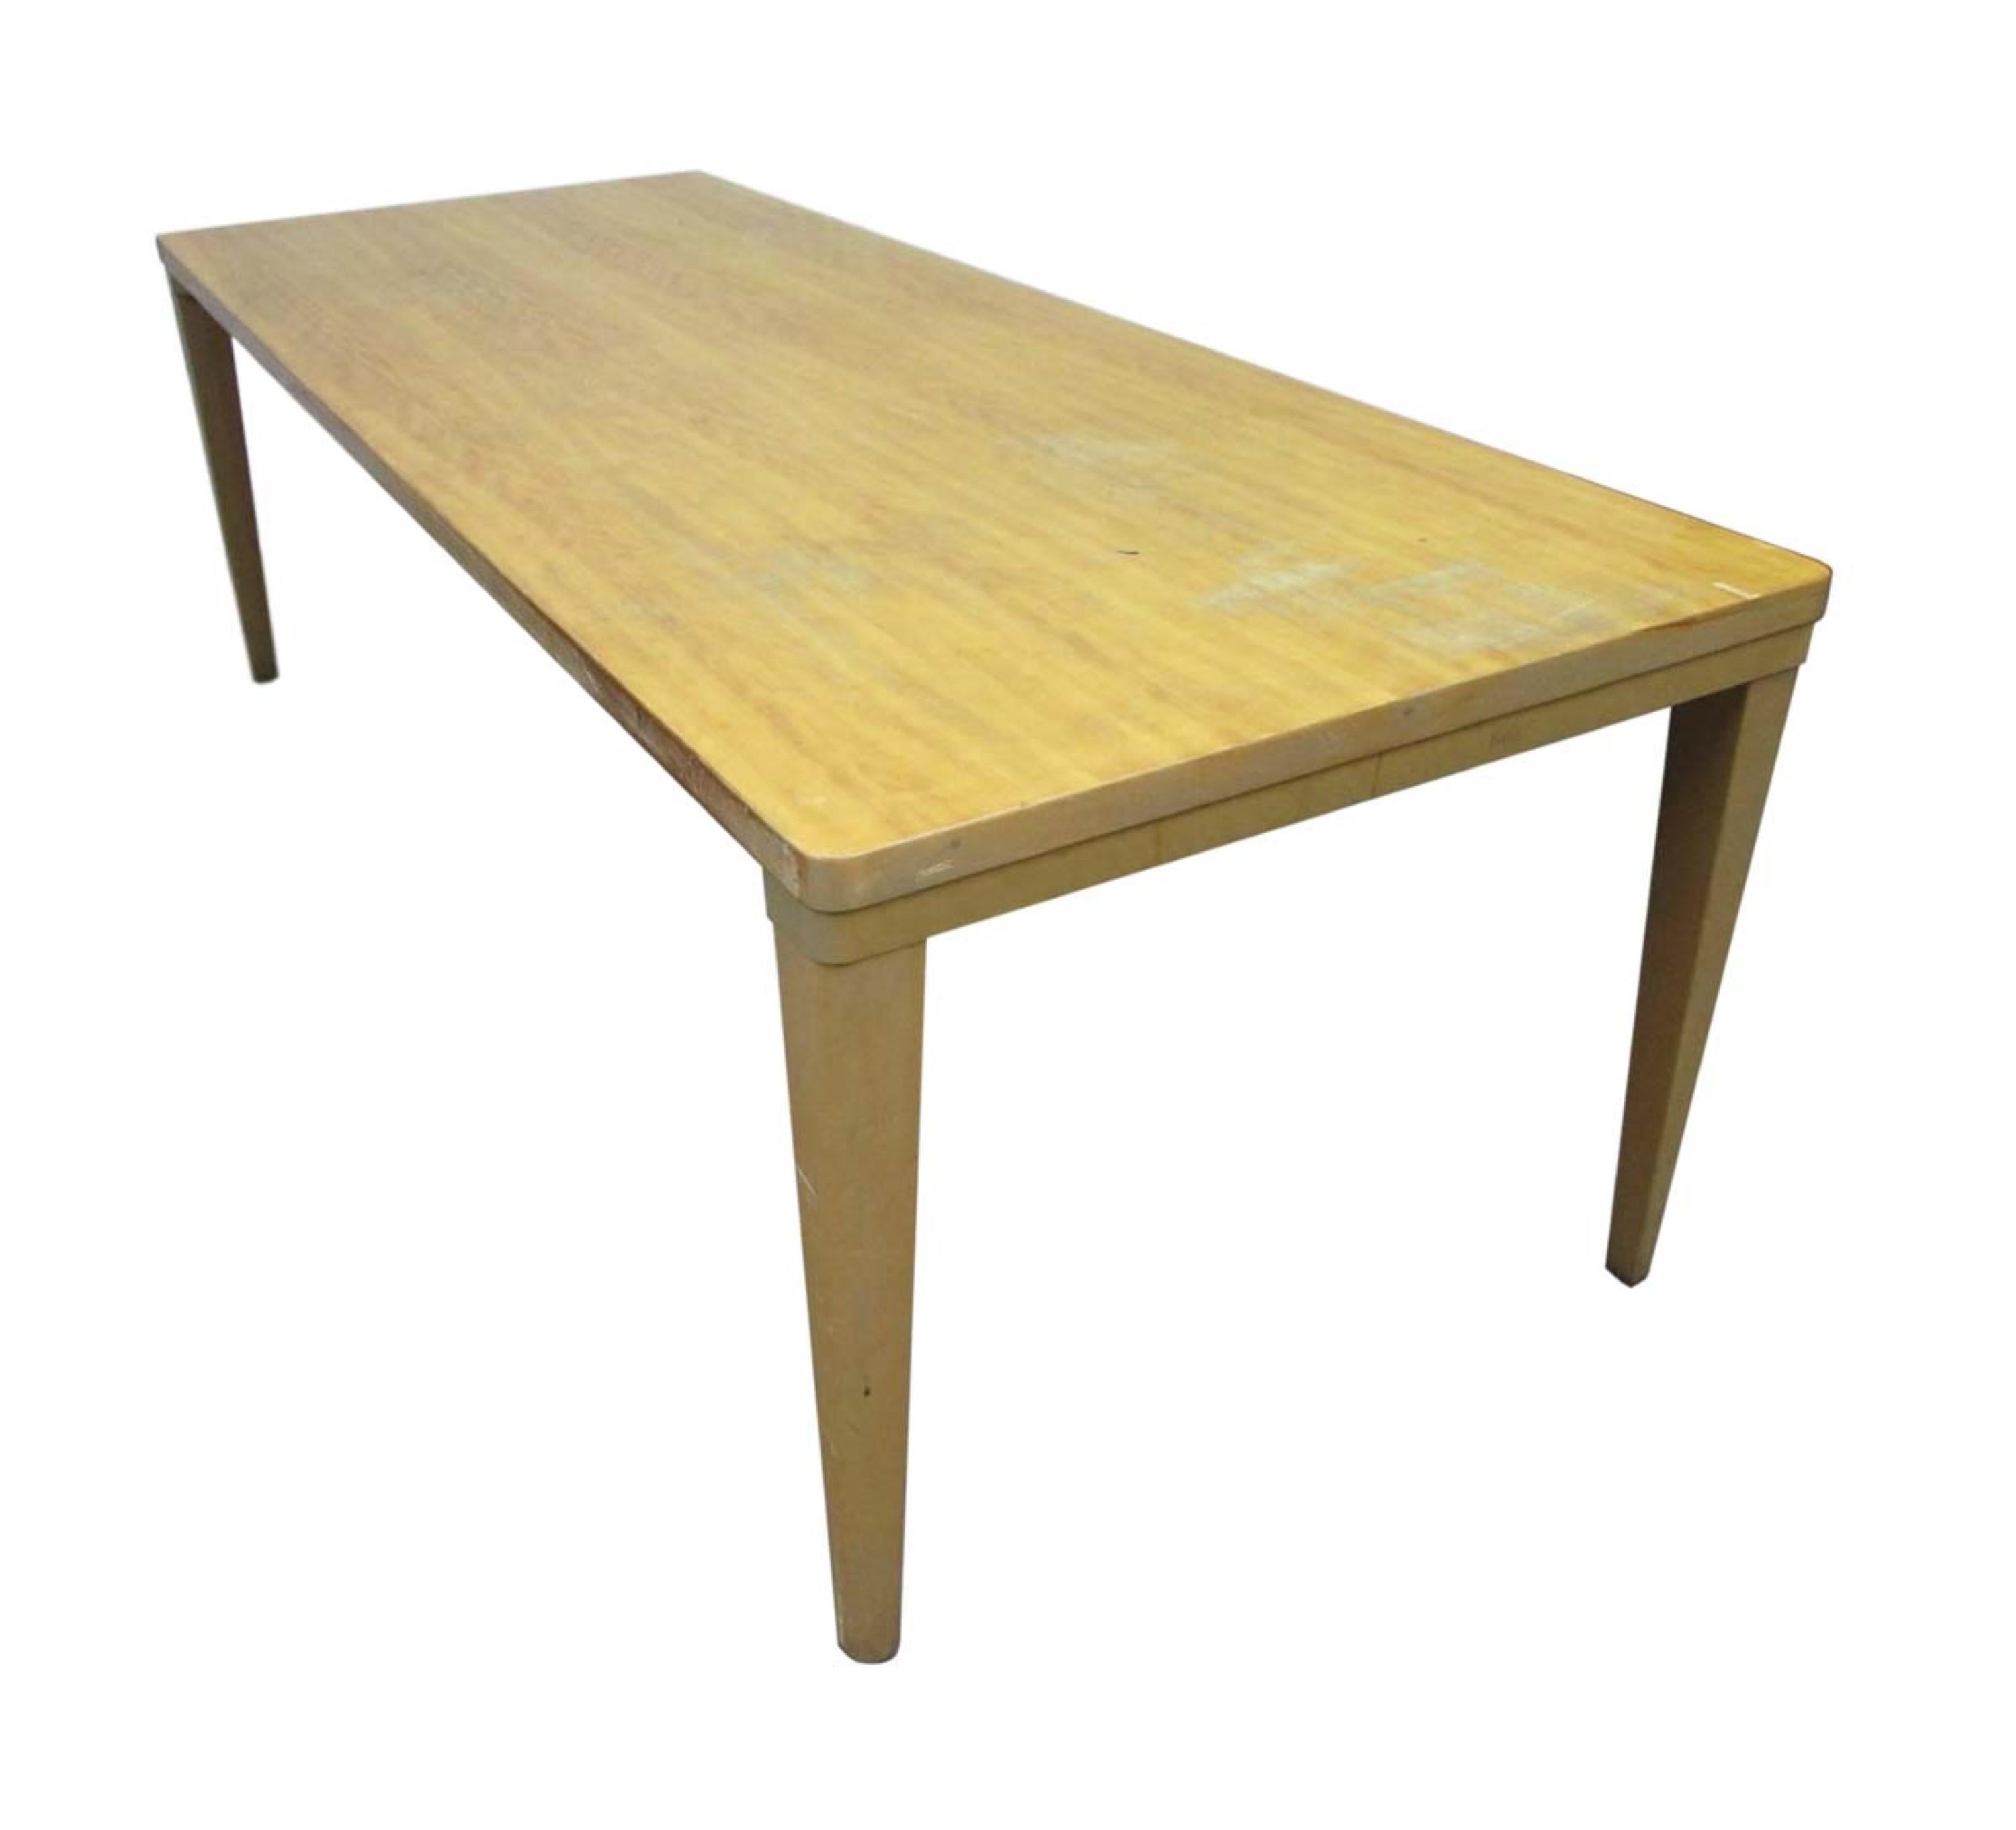 Reclaimed 7.5 ft. sleek maple school tables with tapered legs. These Mid-Century Modern tables can be used for a variety of purposes such as a conference or dining room table or desk. Small quantity available at time of posting. Priced each. Please